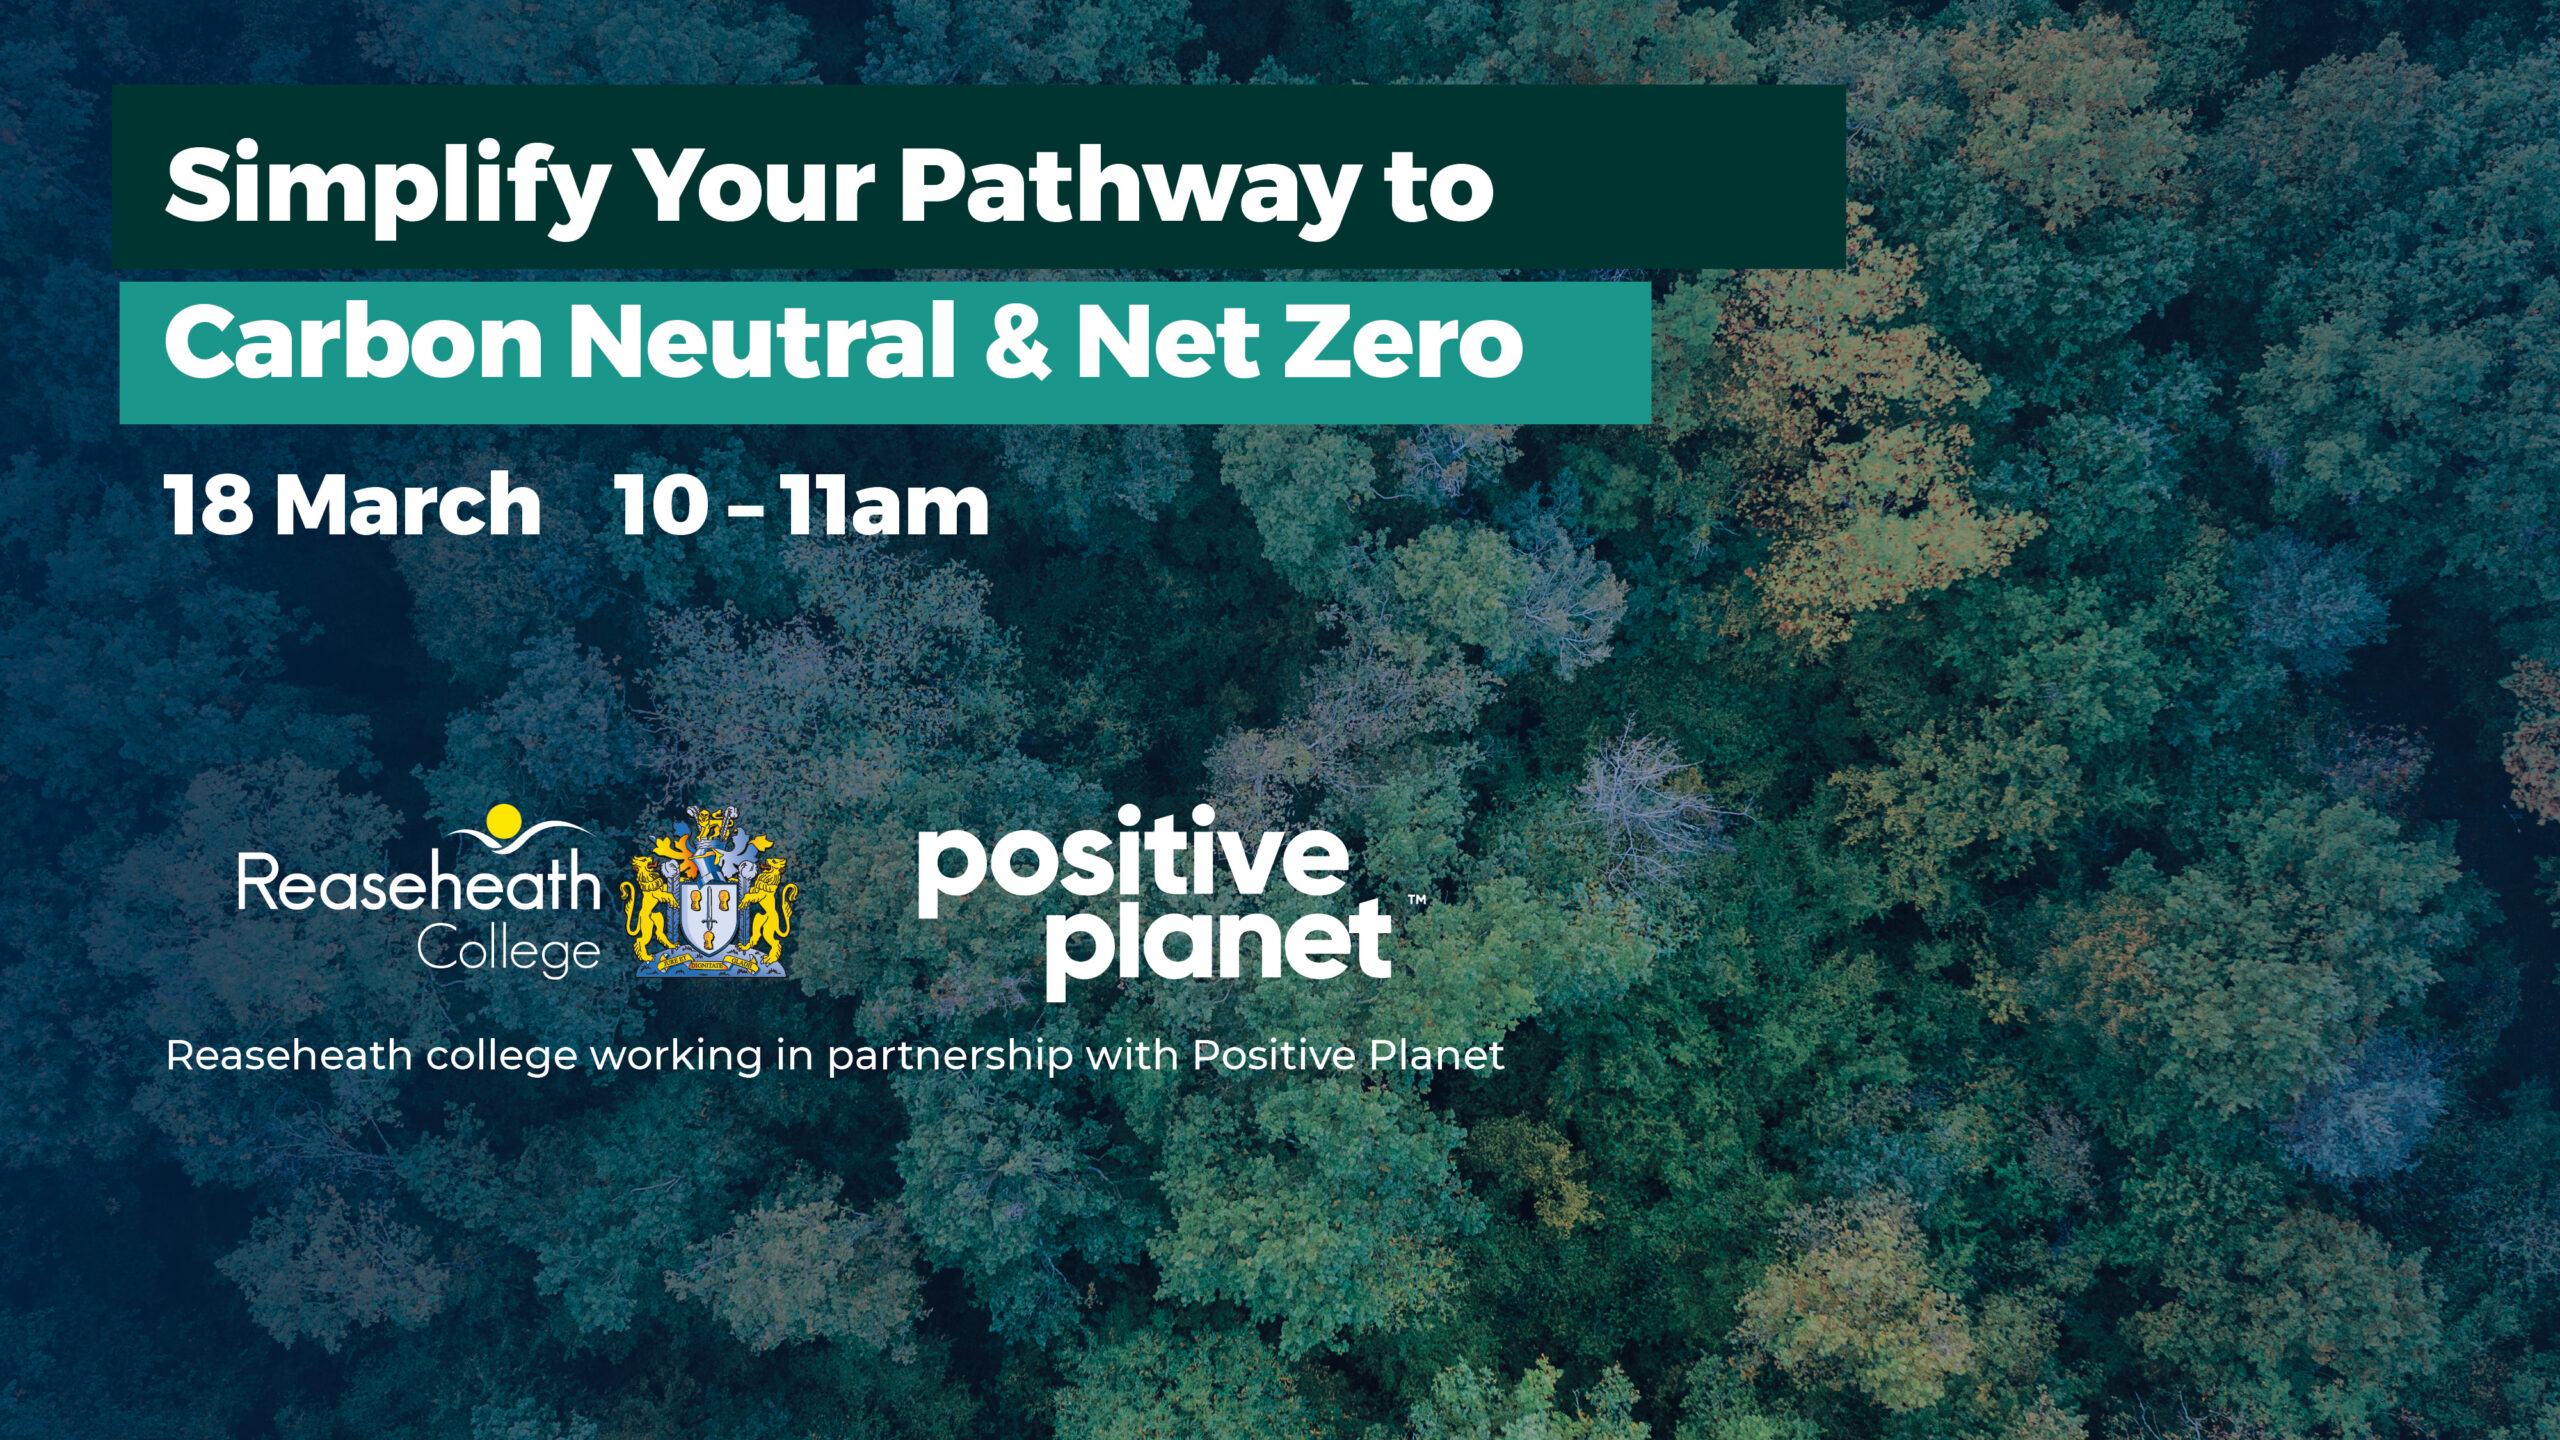 Businesses attend net-zero webinar hosted by Reaseheath College